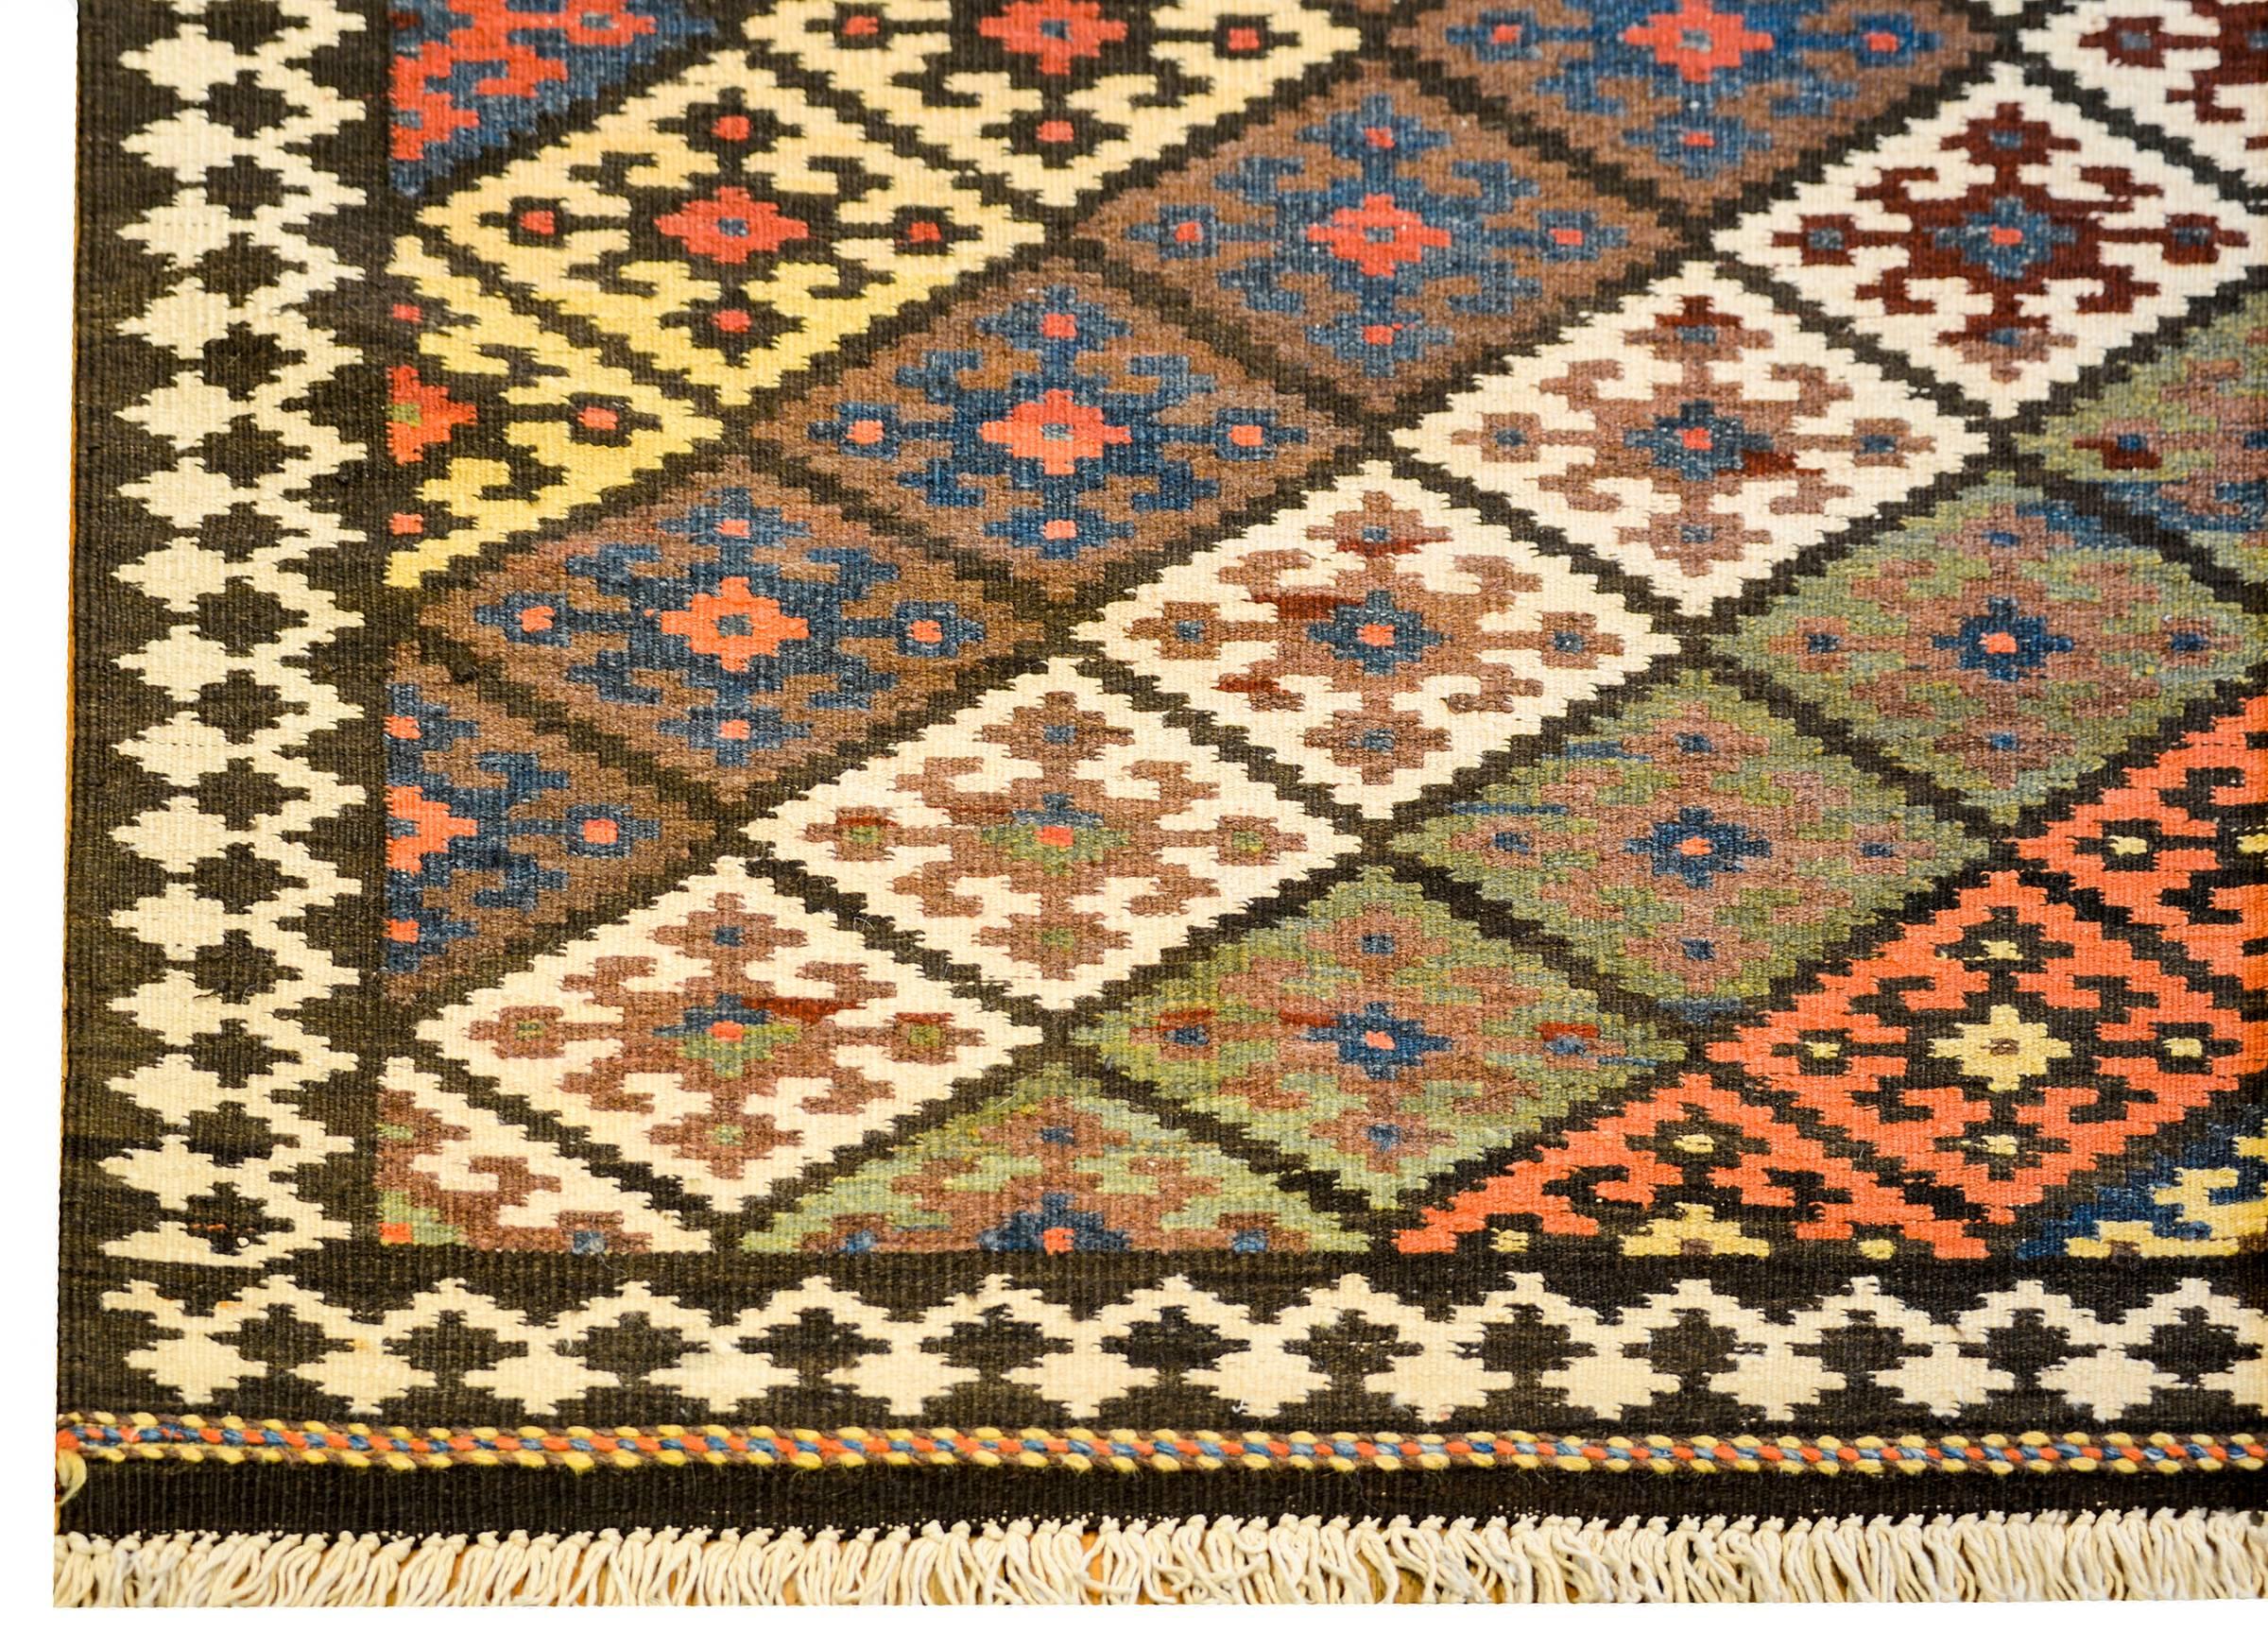 A mid-20th century Persian Saveh Kilim runner with a beautiful all-over diamond pattern of diamonds each with a geometric pattern, all woven in crimson, green, salmon, and grey vegetable dyed wool.